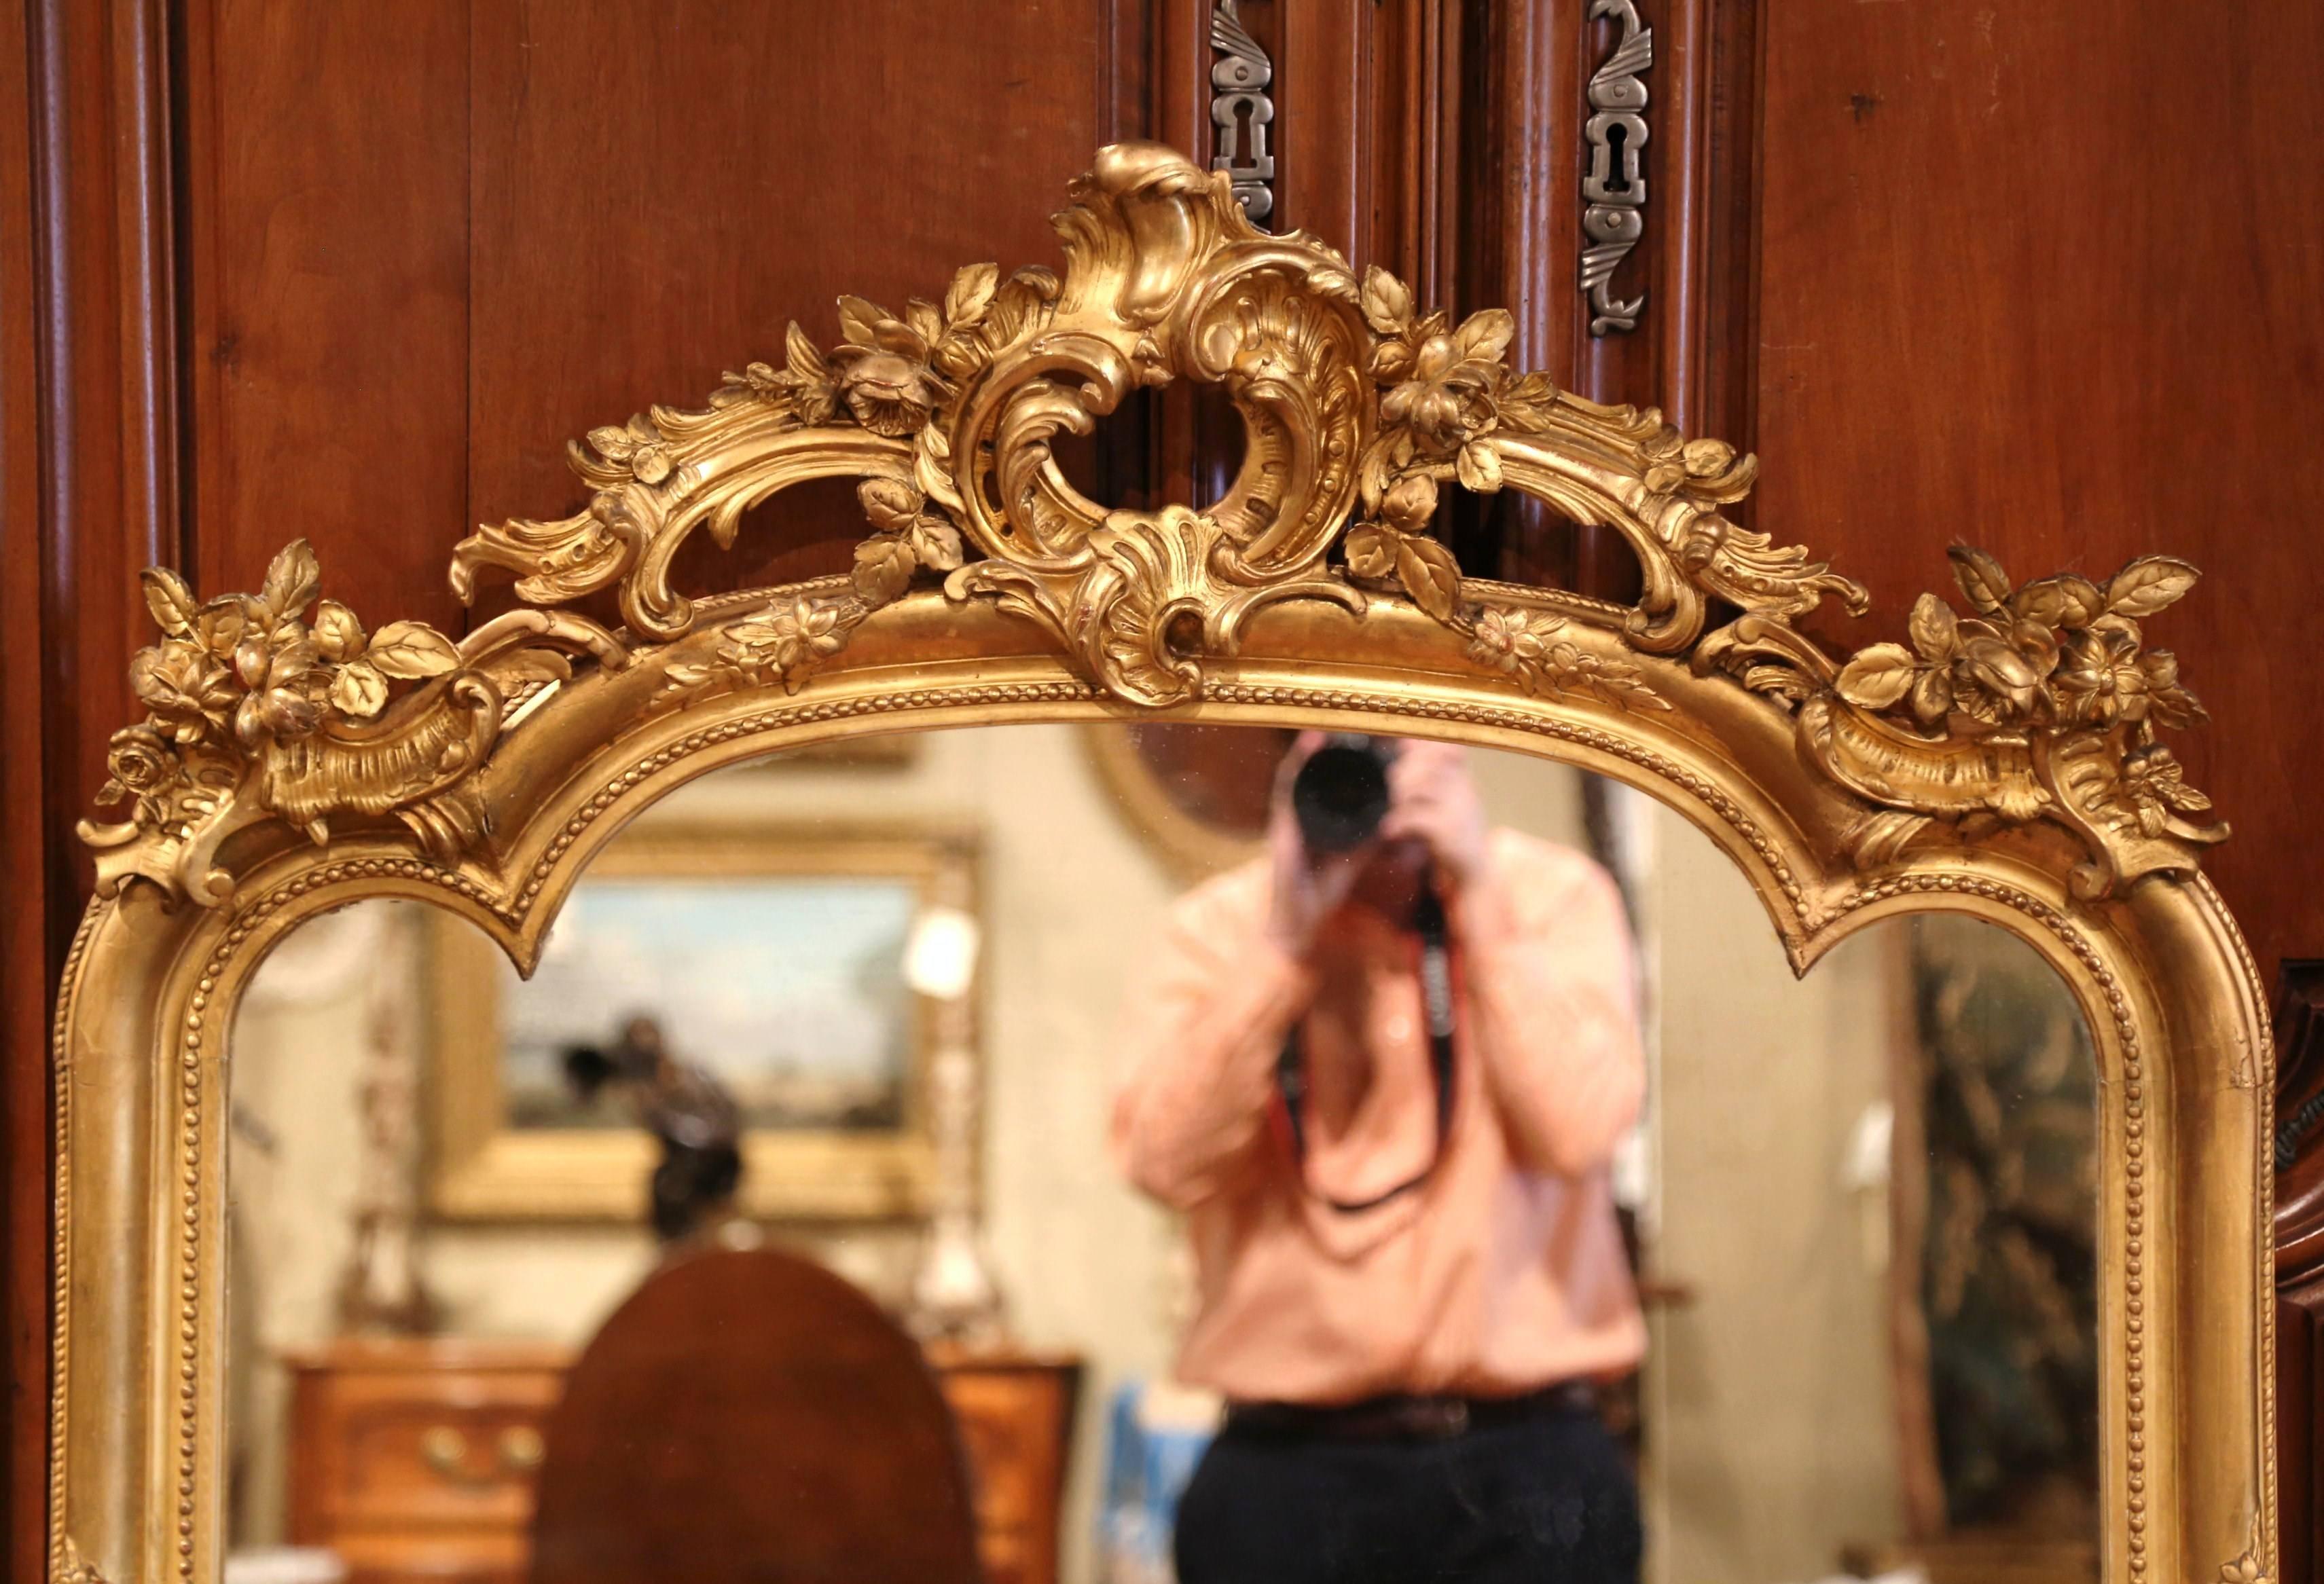 This elegant, antique wall mirror was crafted in Paris, France, circa 1870. The mirror has a curved top and features an intricate frame. The carved pediment has a large shell motif in the center, with flowers and leaves on both sides. Both sides